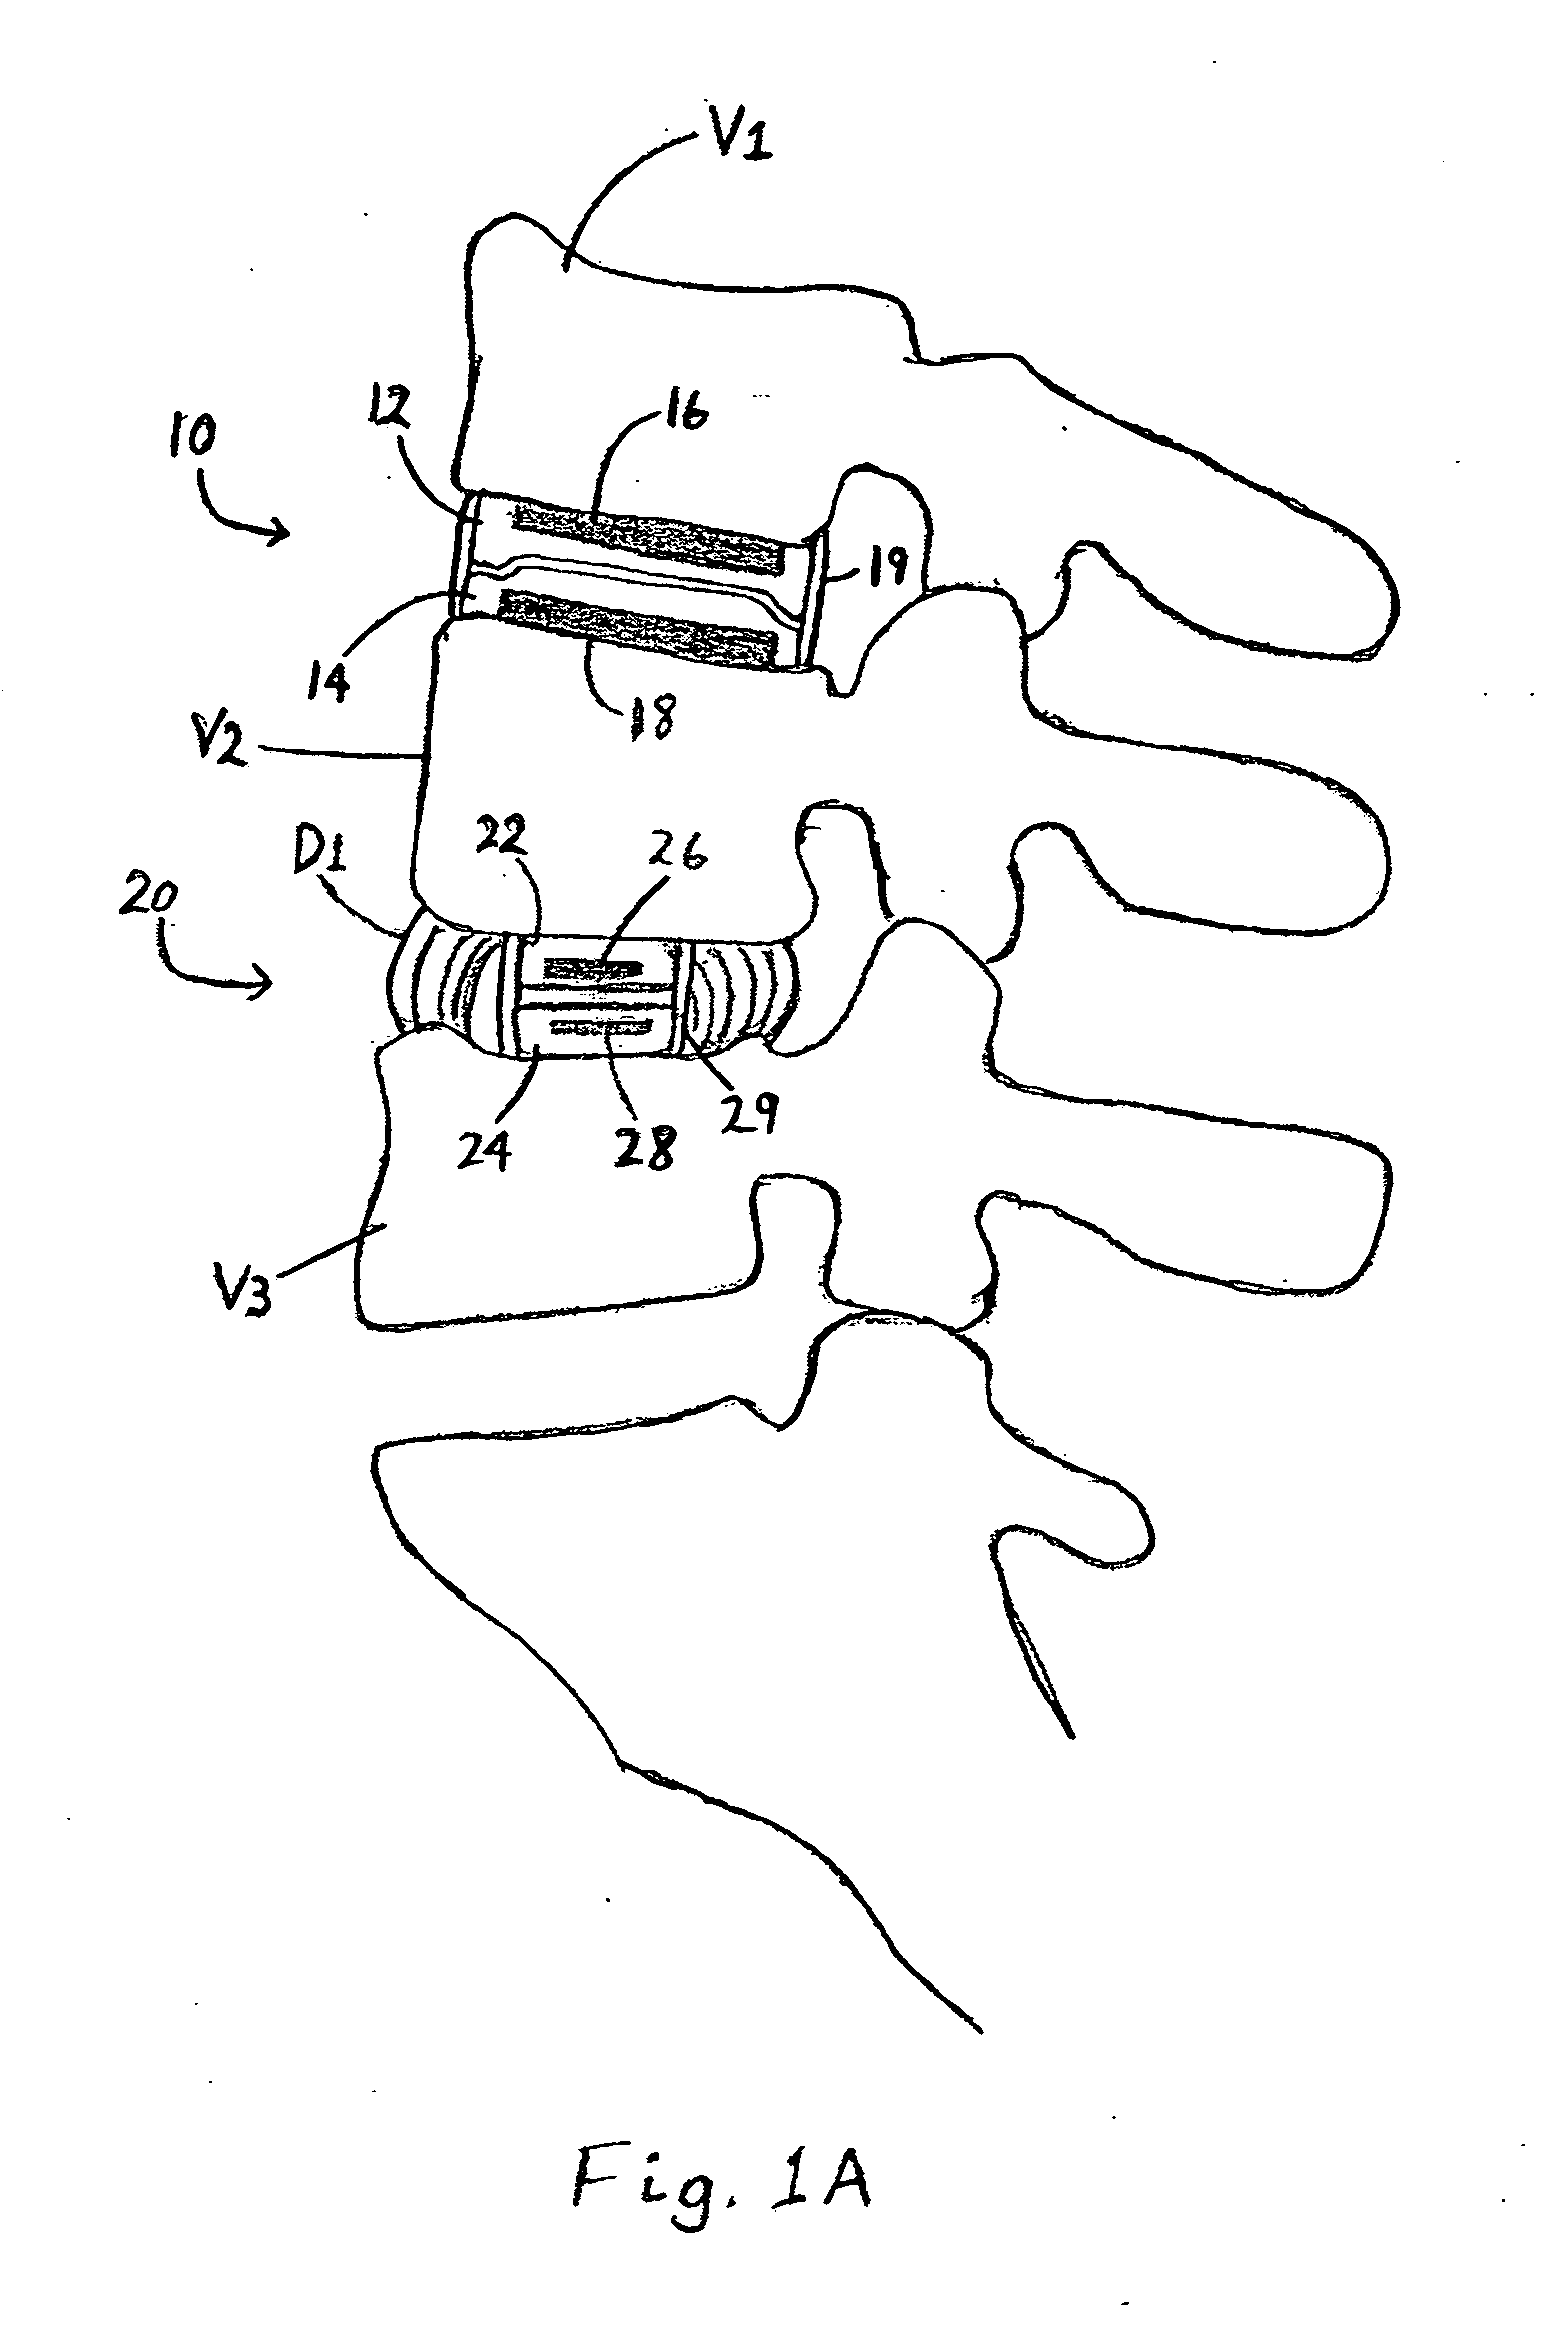 Magnetic spinal implant device